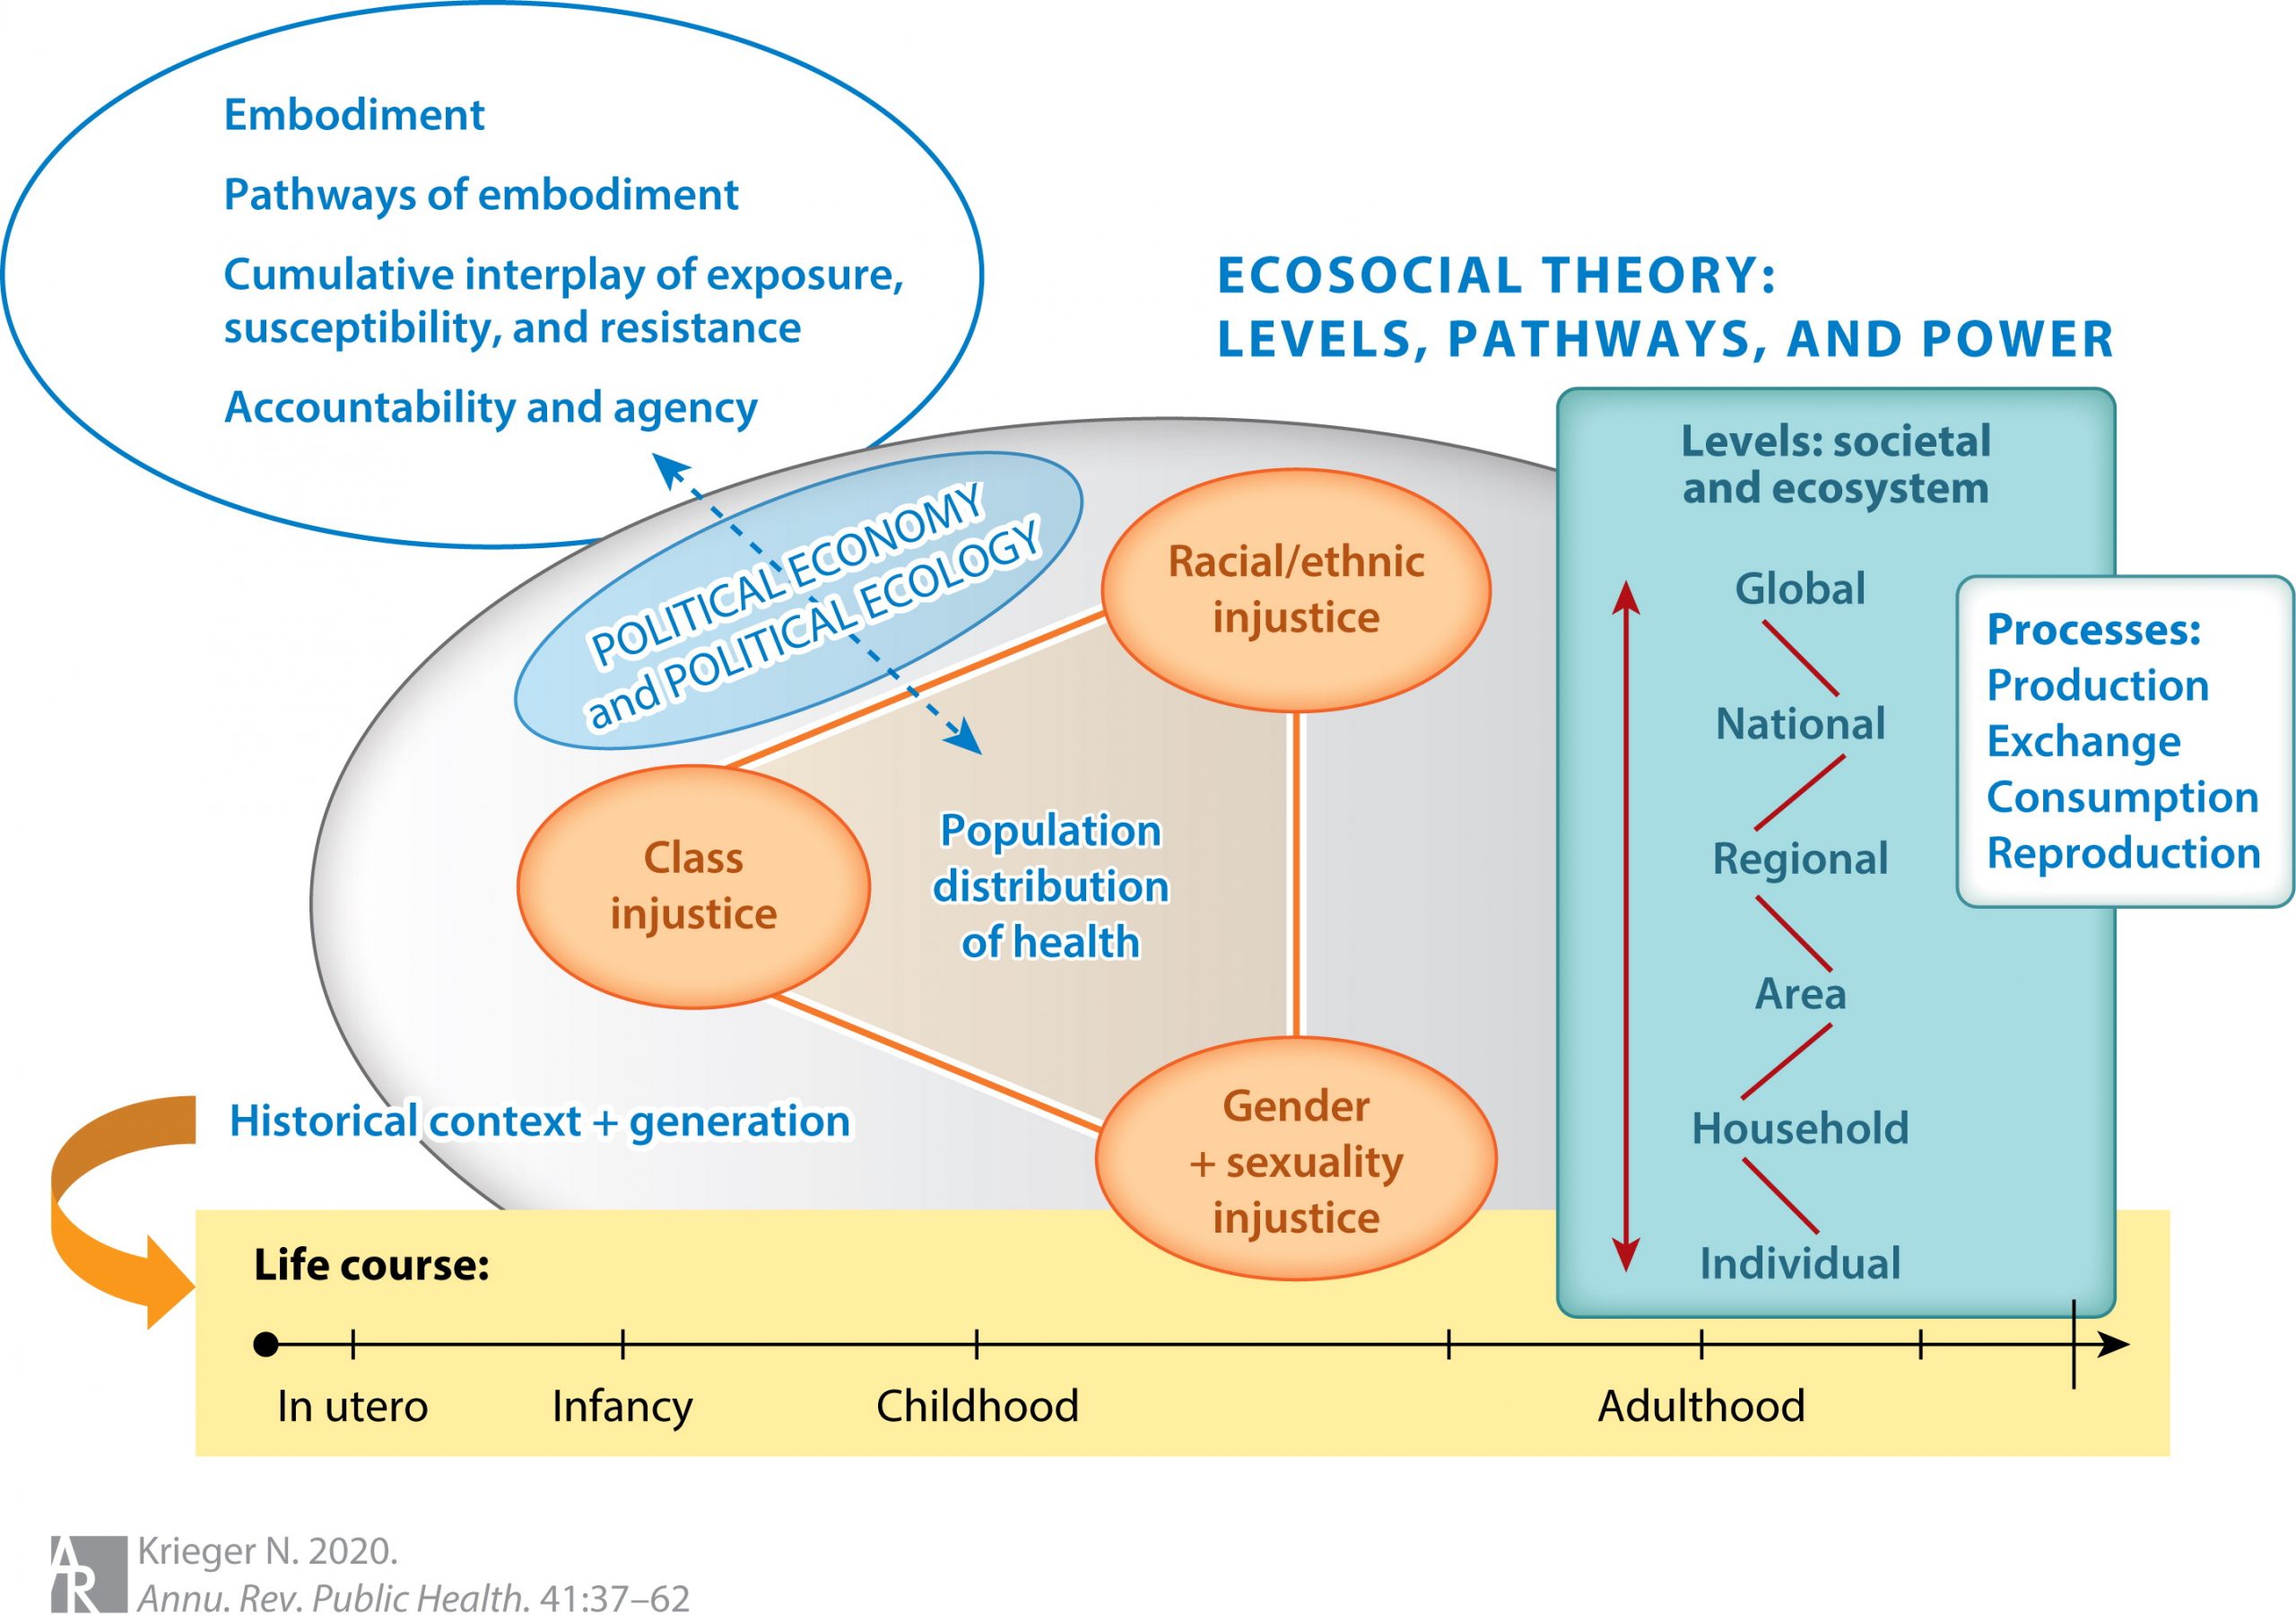 "This figure schematically presents how the ecosocial theory of disease distribution conceptualizes the relationship between population distributions of health, levels, pathways, and power to clarify how health inequities constitute biological expressions of injustice. The ecosocial theory of disease distribution posits four conjoined core constructs (white oval with blue outline) (91–98): (i) embodiment; (ii) pathways of embodiment; (iii) cumulative interplay of exposure, susceptibility, and resistance; and (iv) accountability and agency. These constructs are fundamental to causal explication of population distributions of health. All of these constructs operate (v) across the life course, contextualized in relation to historical generation (i.e., birth cohort) (yellow rectangle) and (vi) across levels (turquoise rectangle), as mediated by (vii) the society's political economy and political ecology (light blue oval)." (Krieger, 2020)